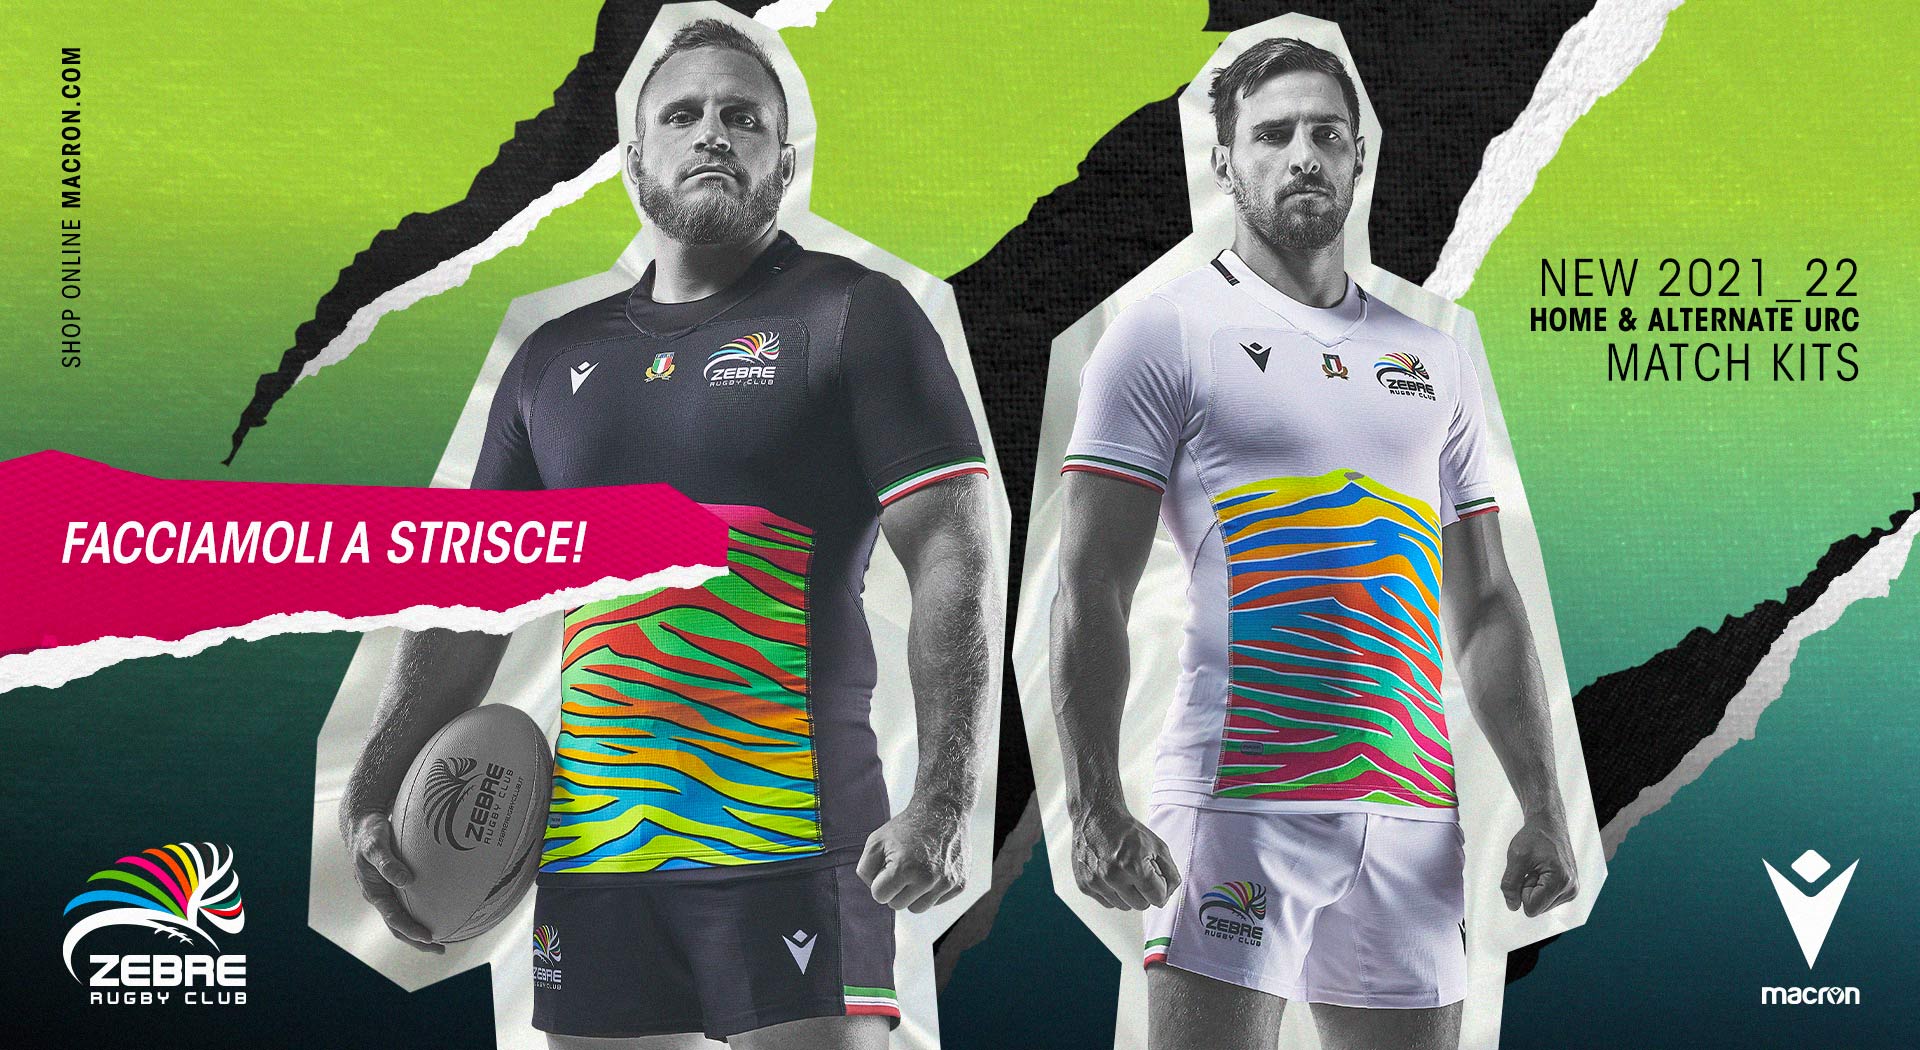 MULTI-COLOURED ZEBRA GRAPHICS AND A HEROES MOTTO ON THE NEW ZEBRE RUGBY JERSEYS Weltweiter Versand